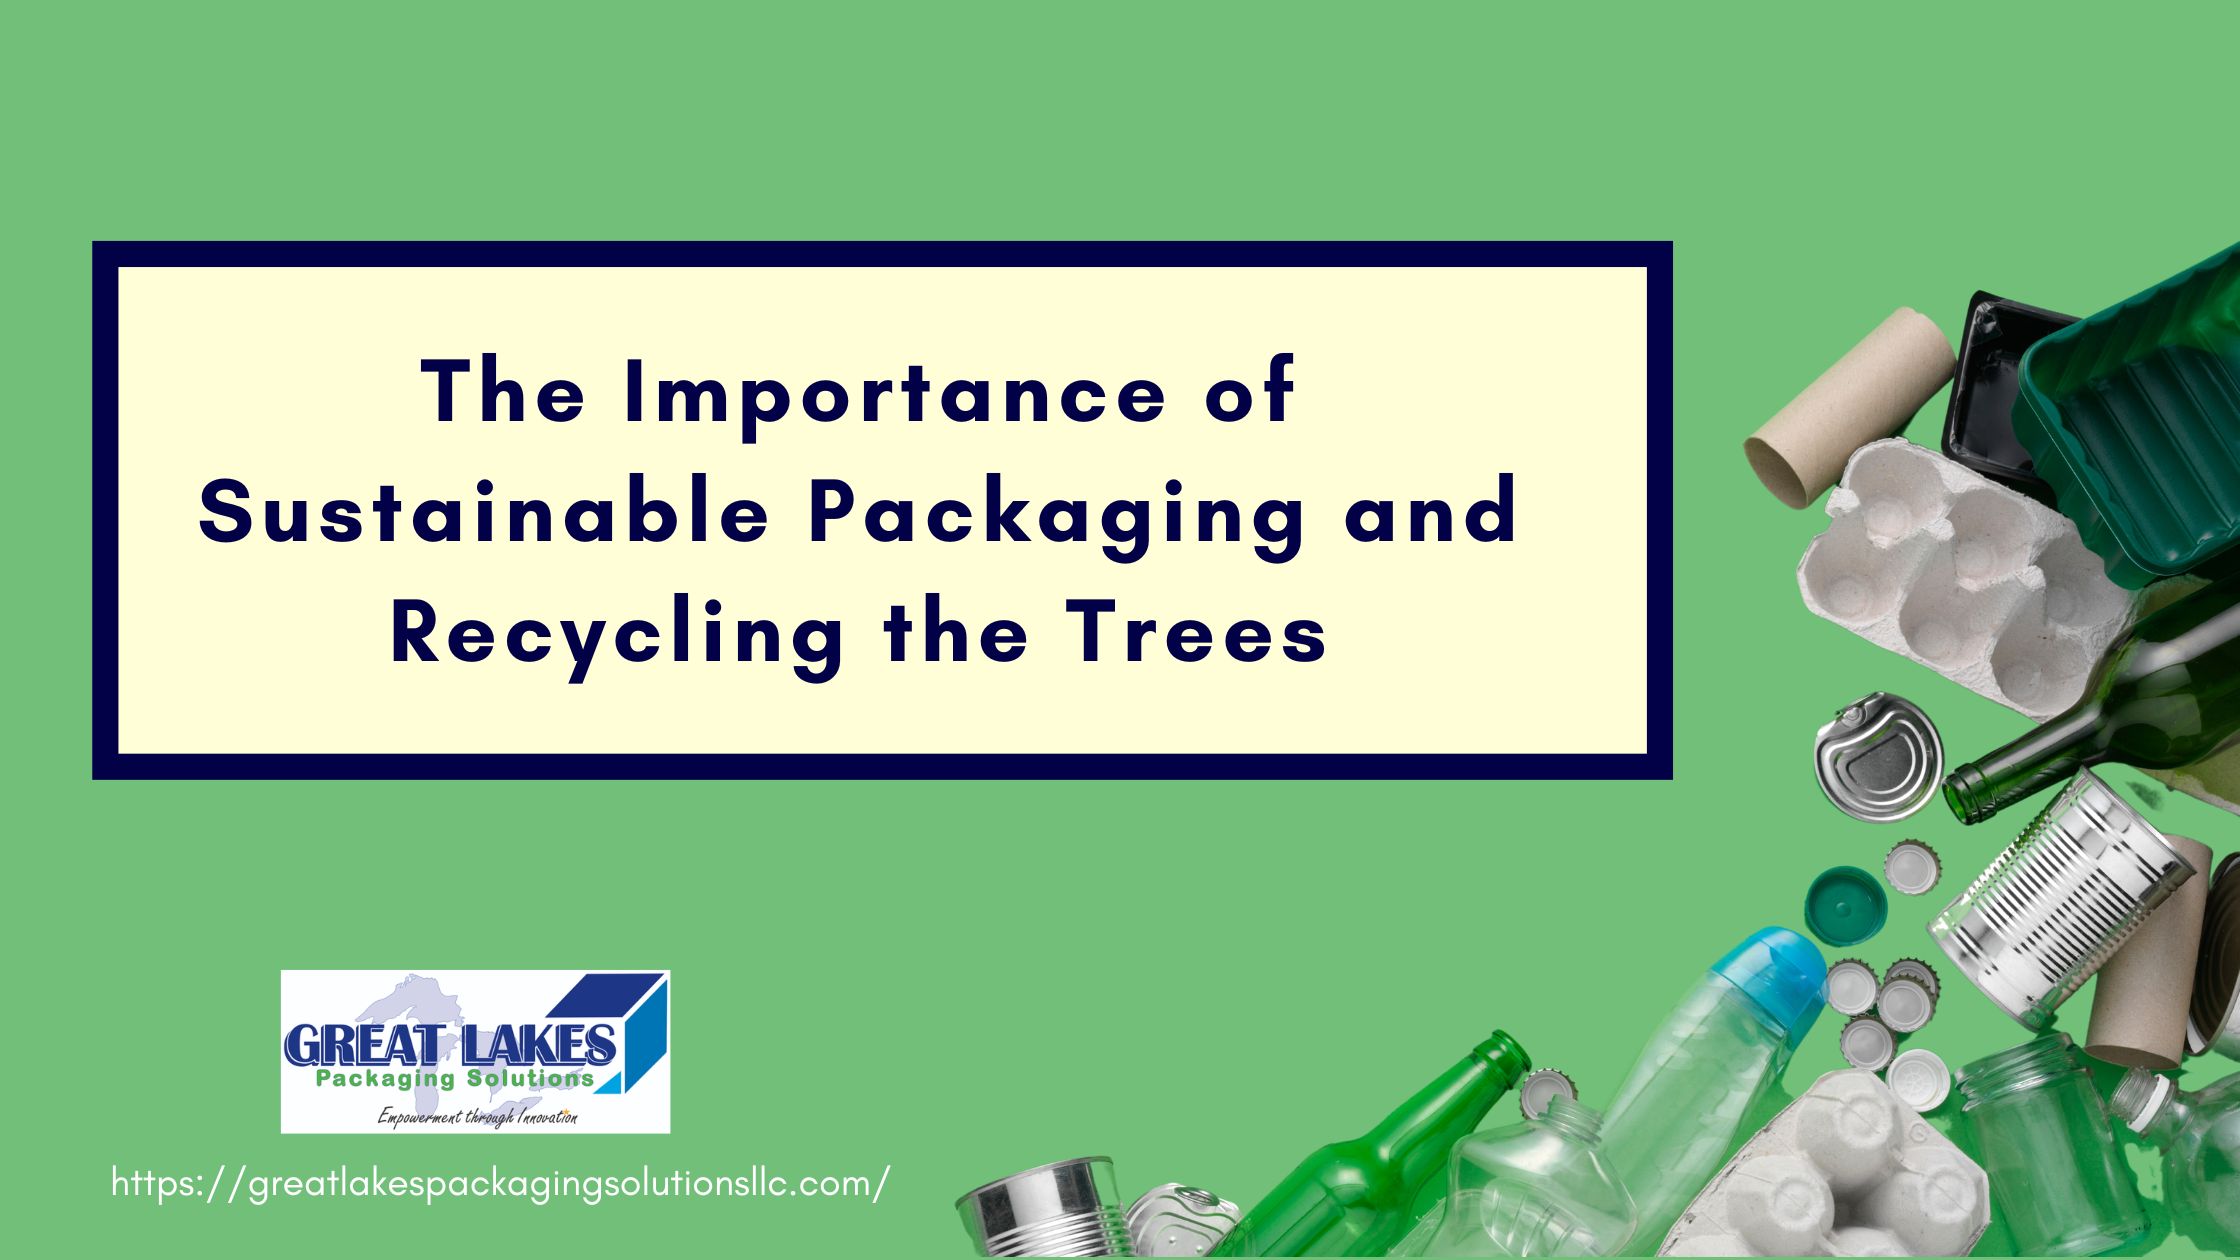 The Importance of Sustainable Packaging and Recycling